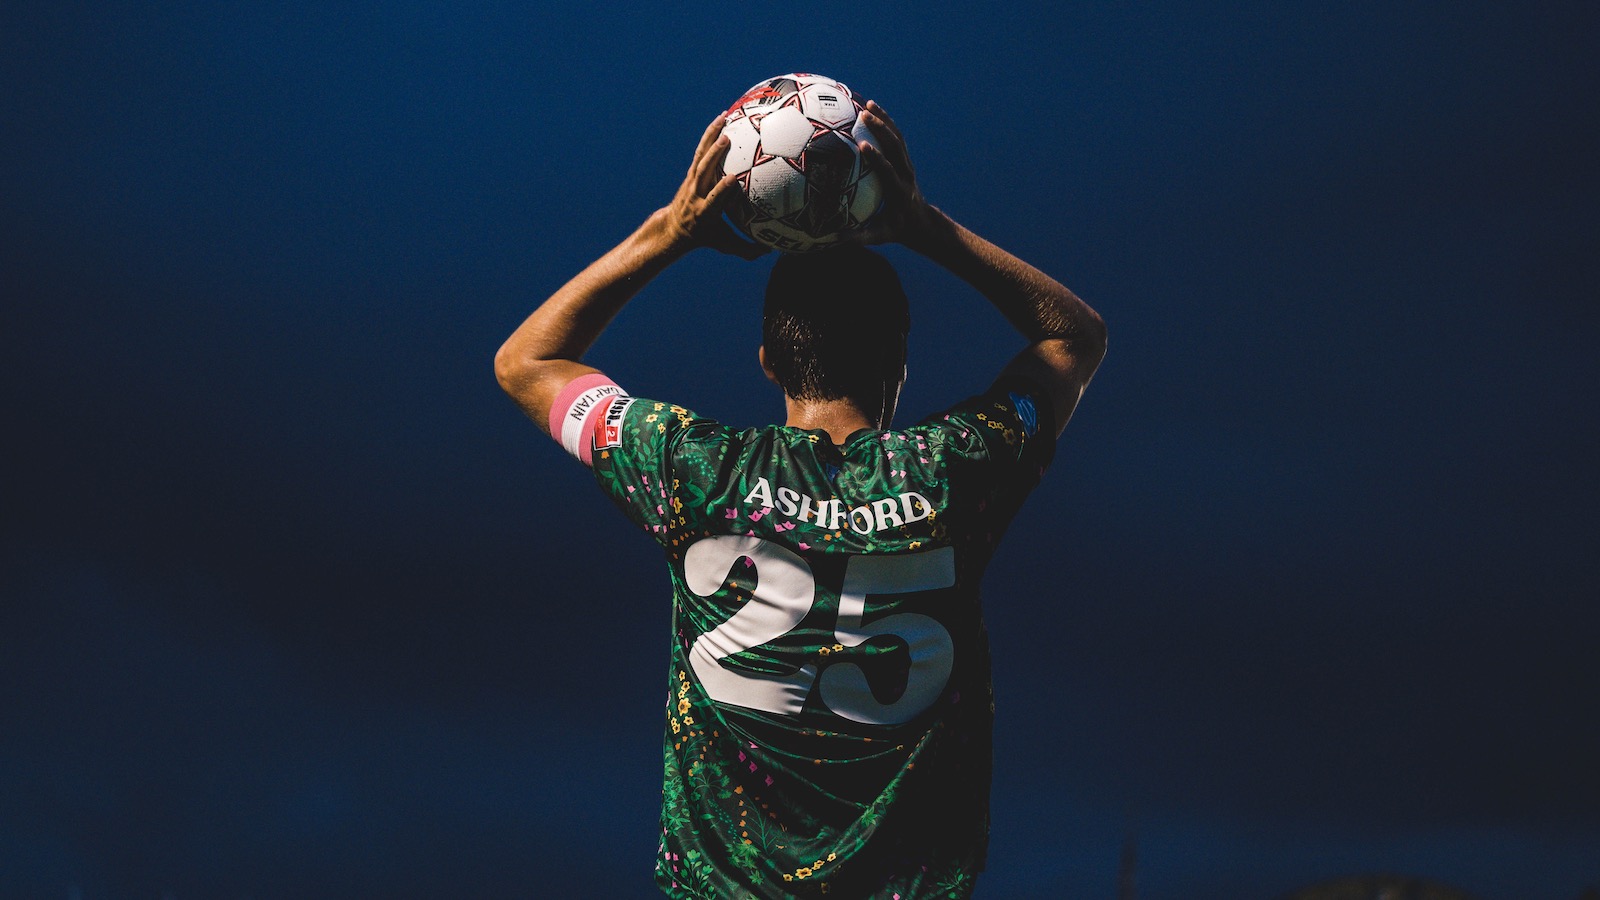 Jake Ashford, wearing a green Vermont Green FC jersey, is seen from behind against a dark sky holding the ball overhead with both hands.